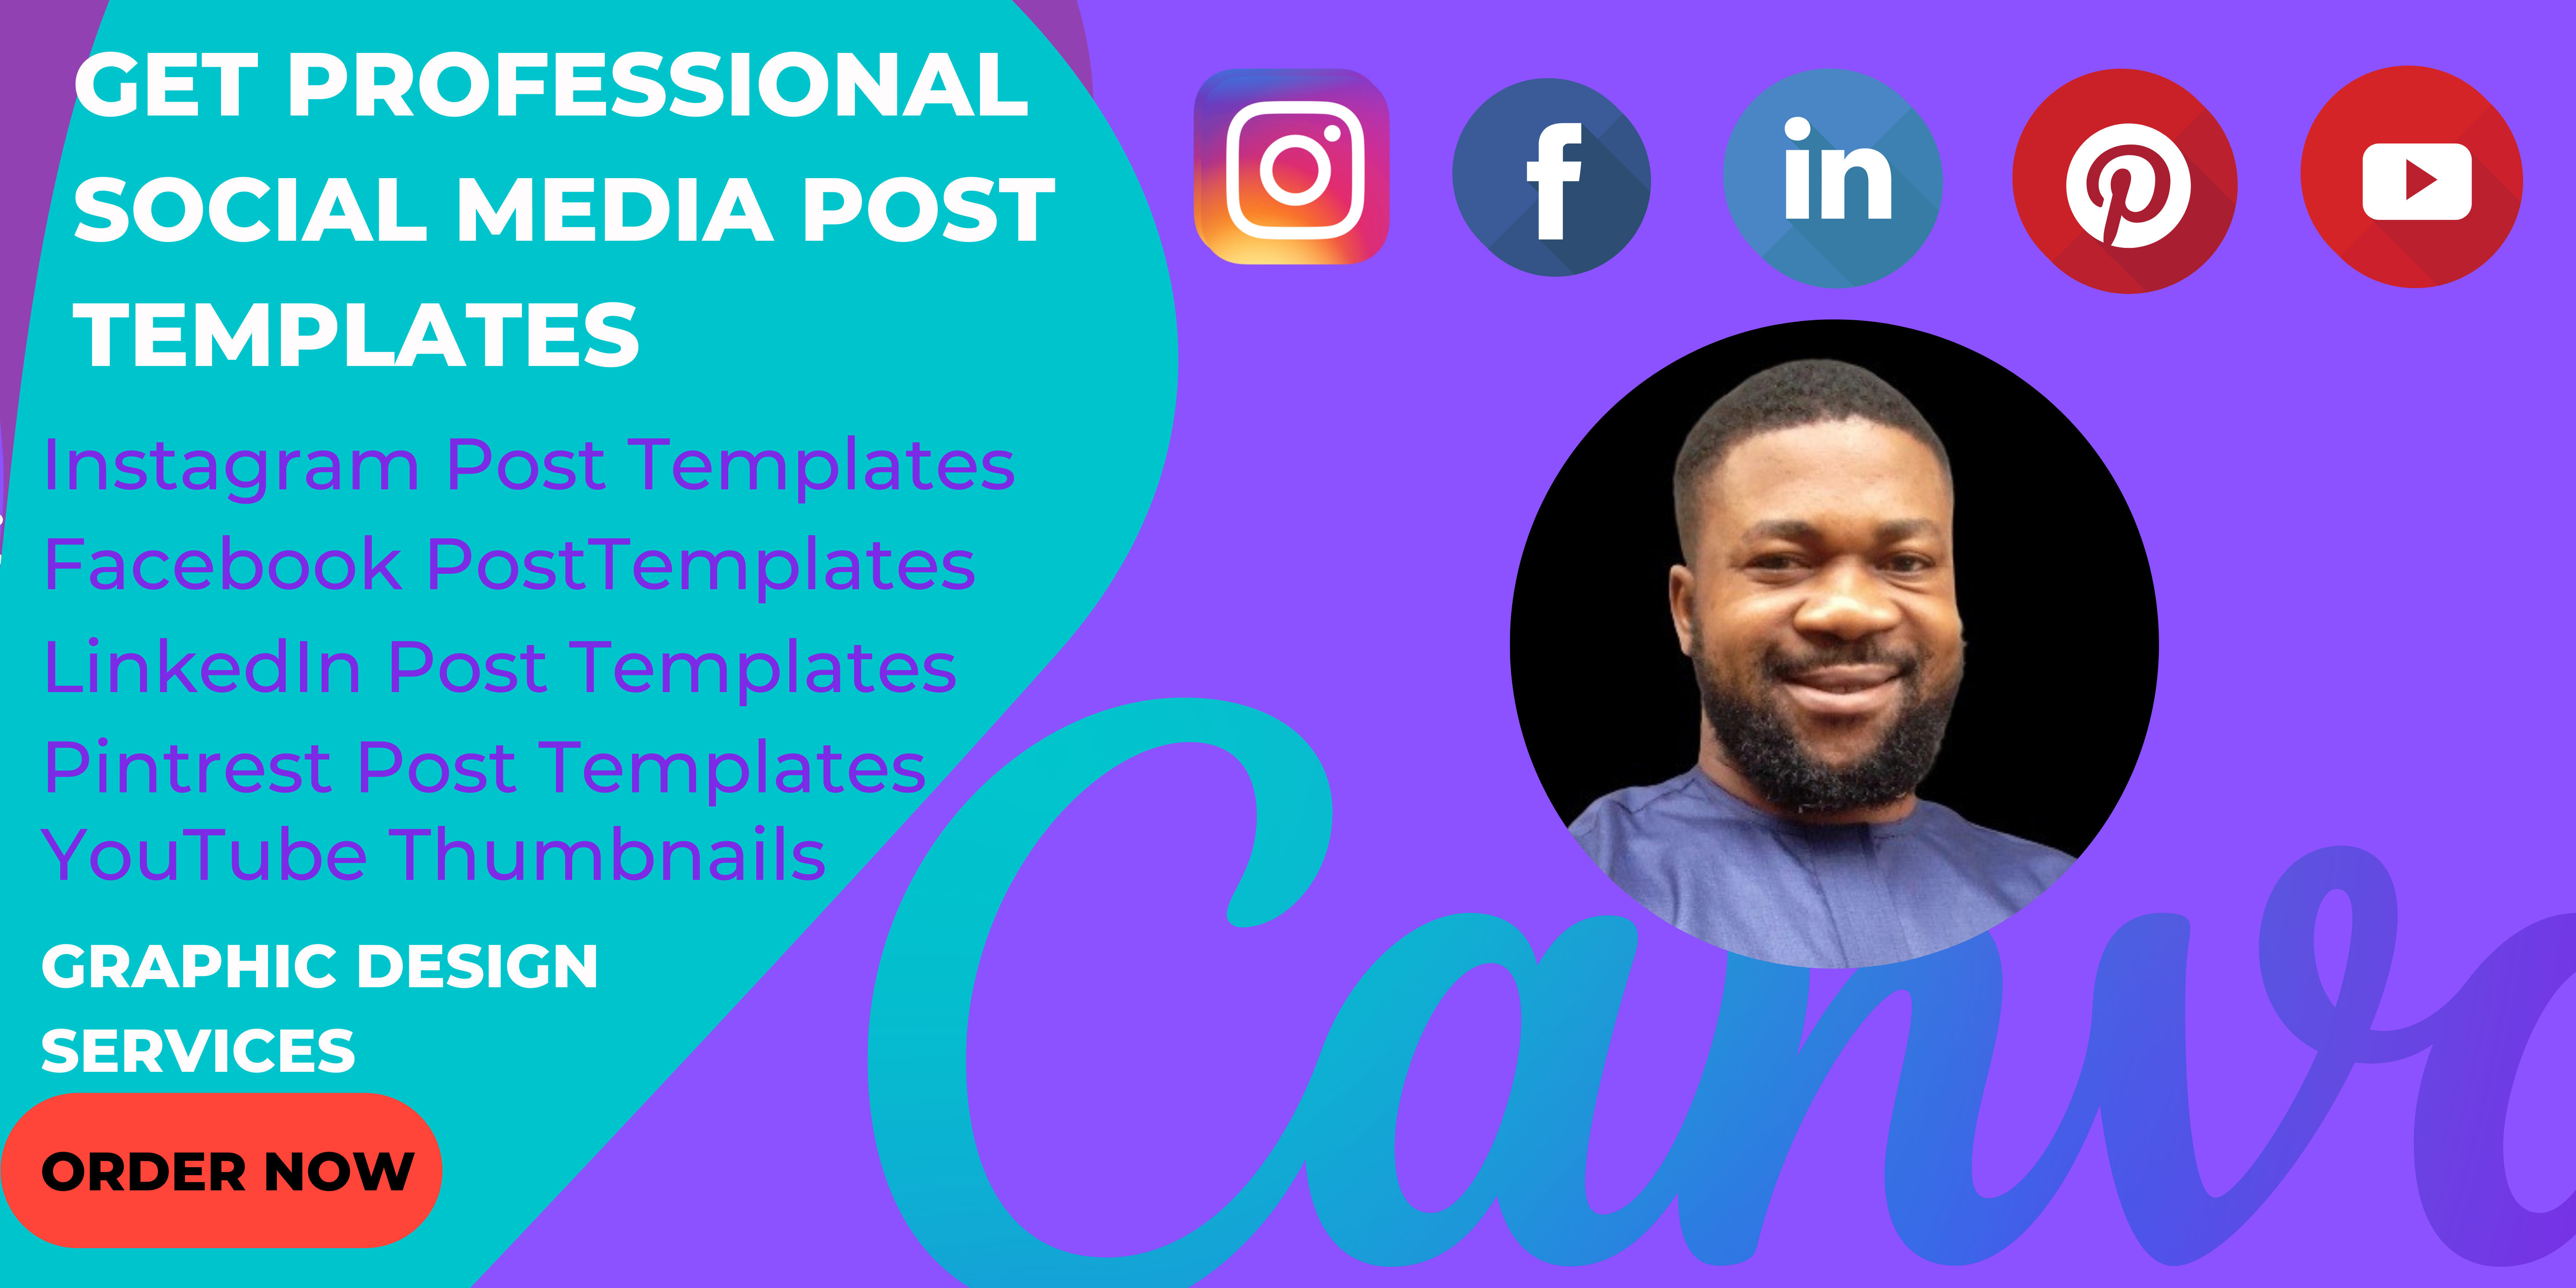 I will create professional templates logo for any social media post using Canva for you